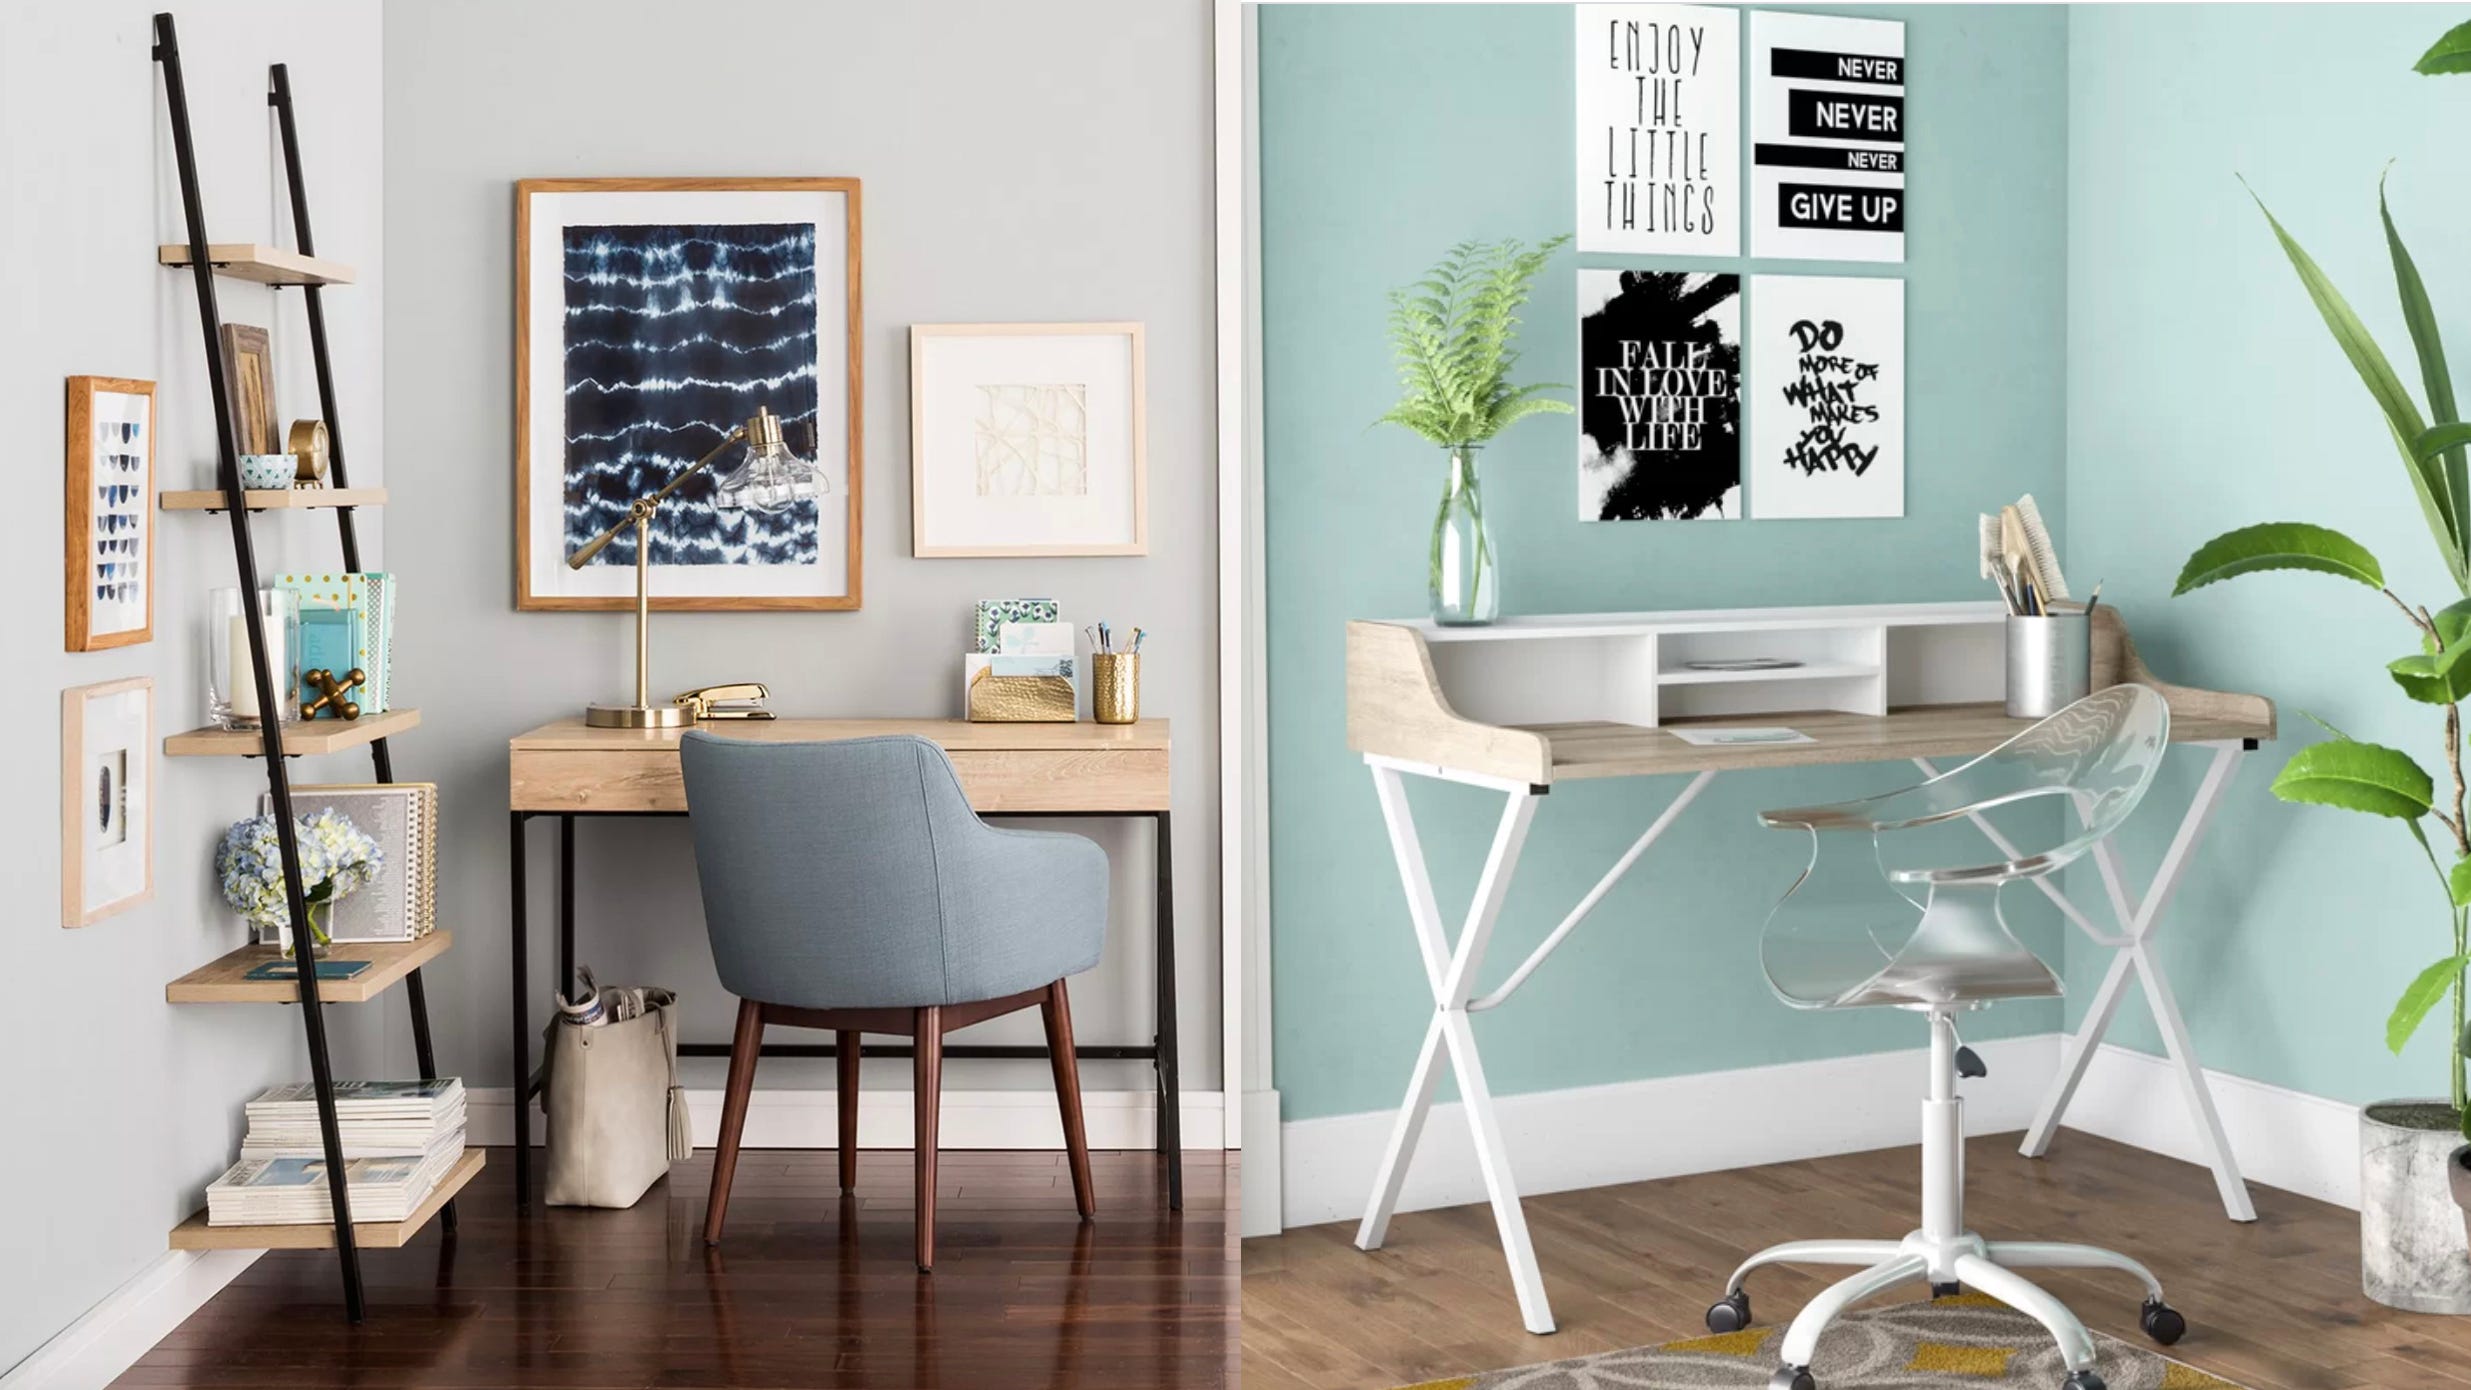 desk and chair set target